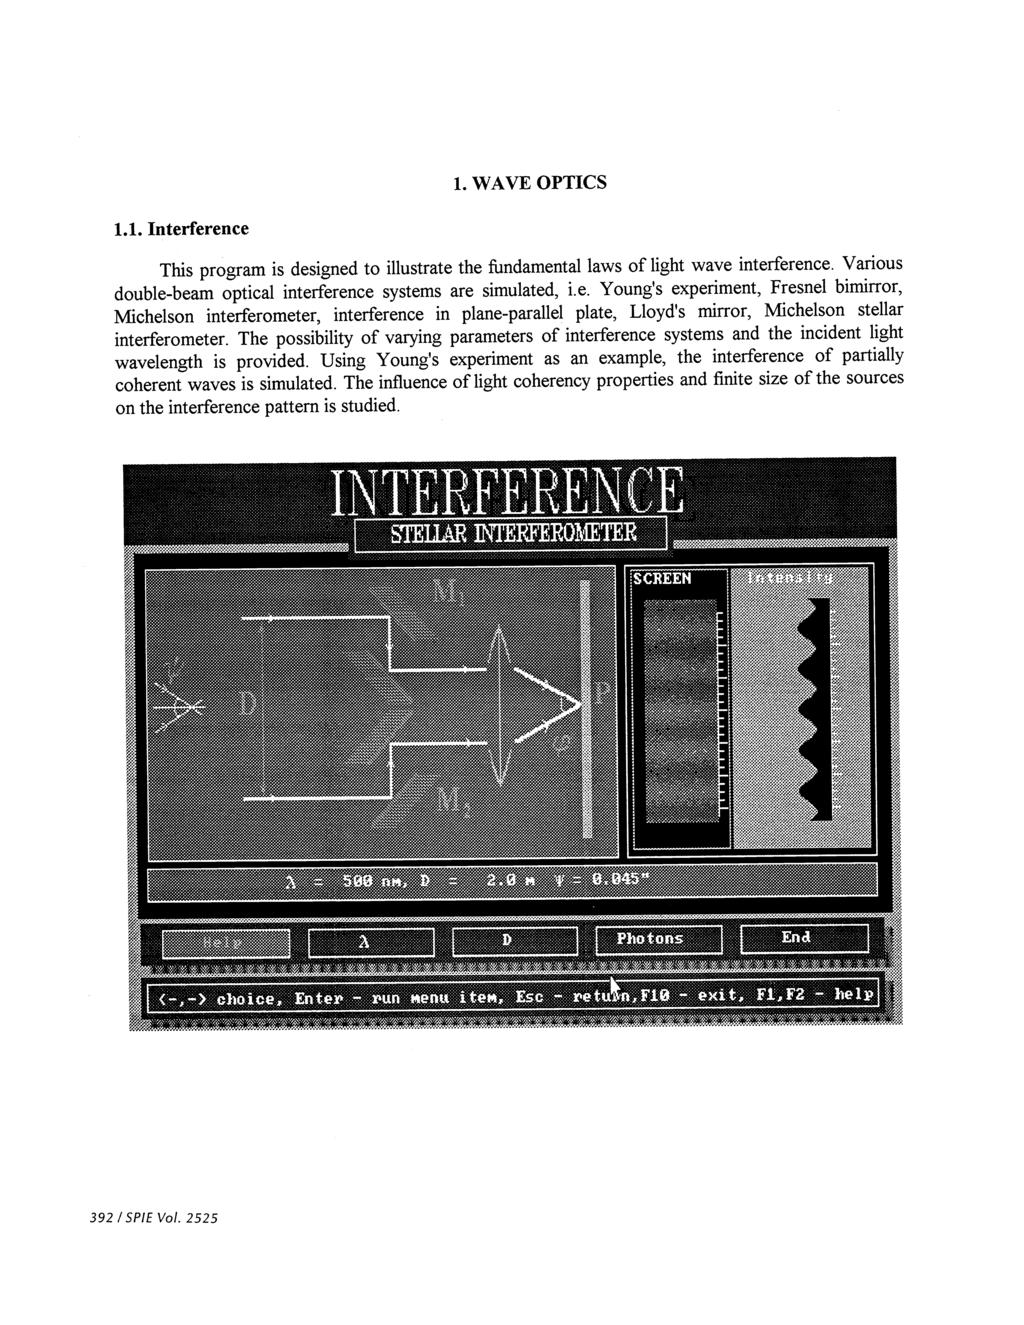 1. WAVE OPTICS 1.1. Interference This program is designed to illustrate the ftmdamental laws of light wave interference. Various double-beam optical interference systems are simulated, i.e. Young's experiment, Fresnel bimirror, Michelson interferometer, interference in plane-parallel plate, Lloyd's mirror, Michelson stellar interferometer.